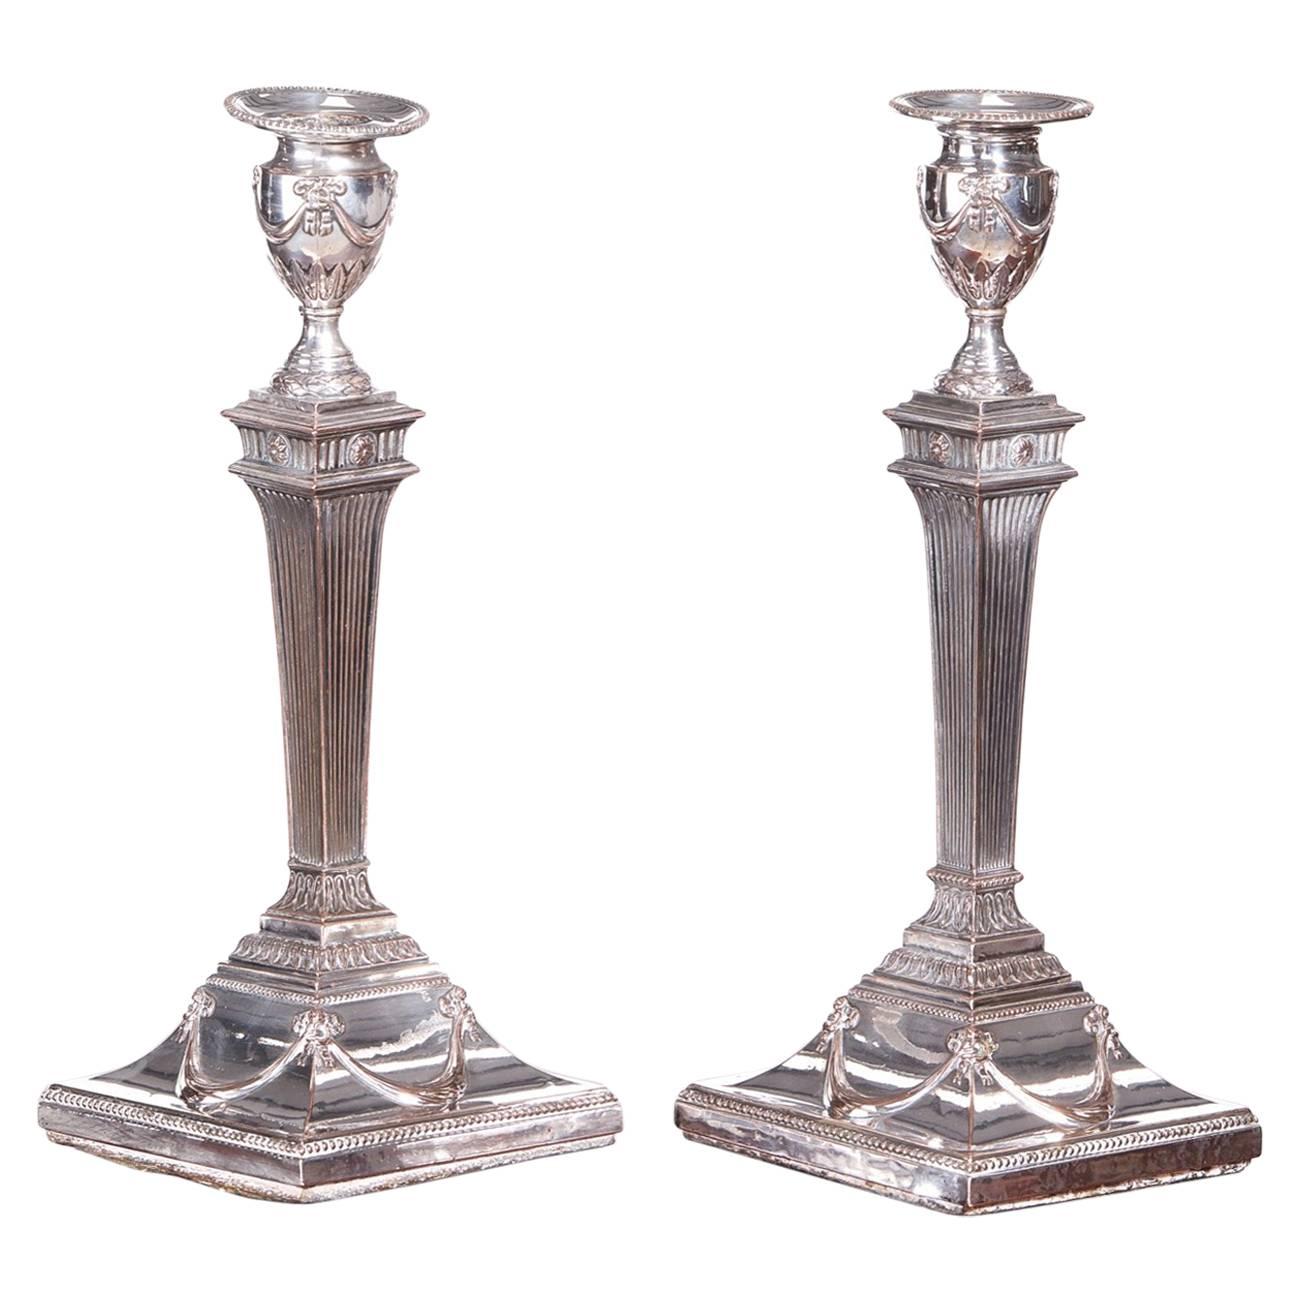 Pair of George III Silver Plated Candlesticks